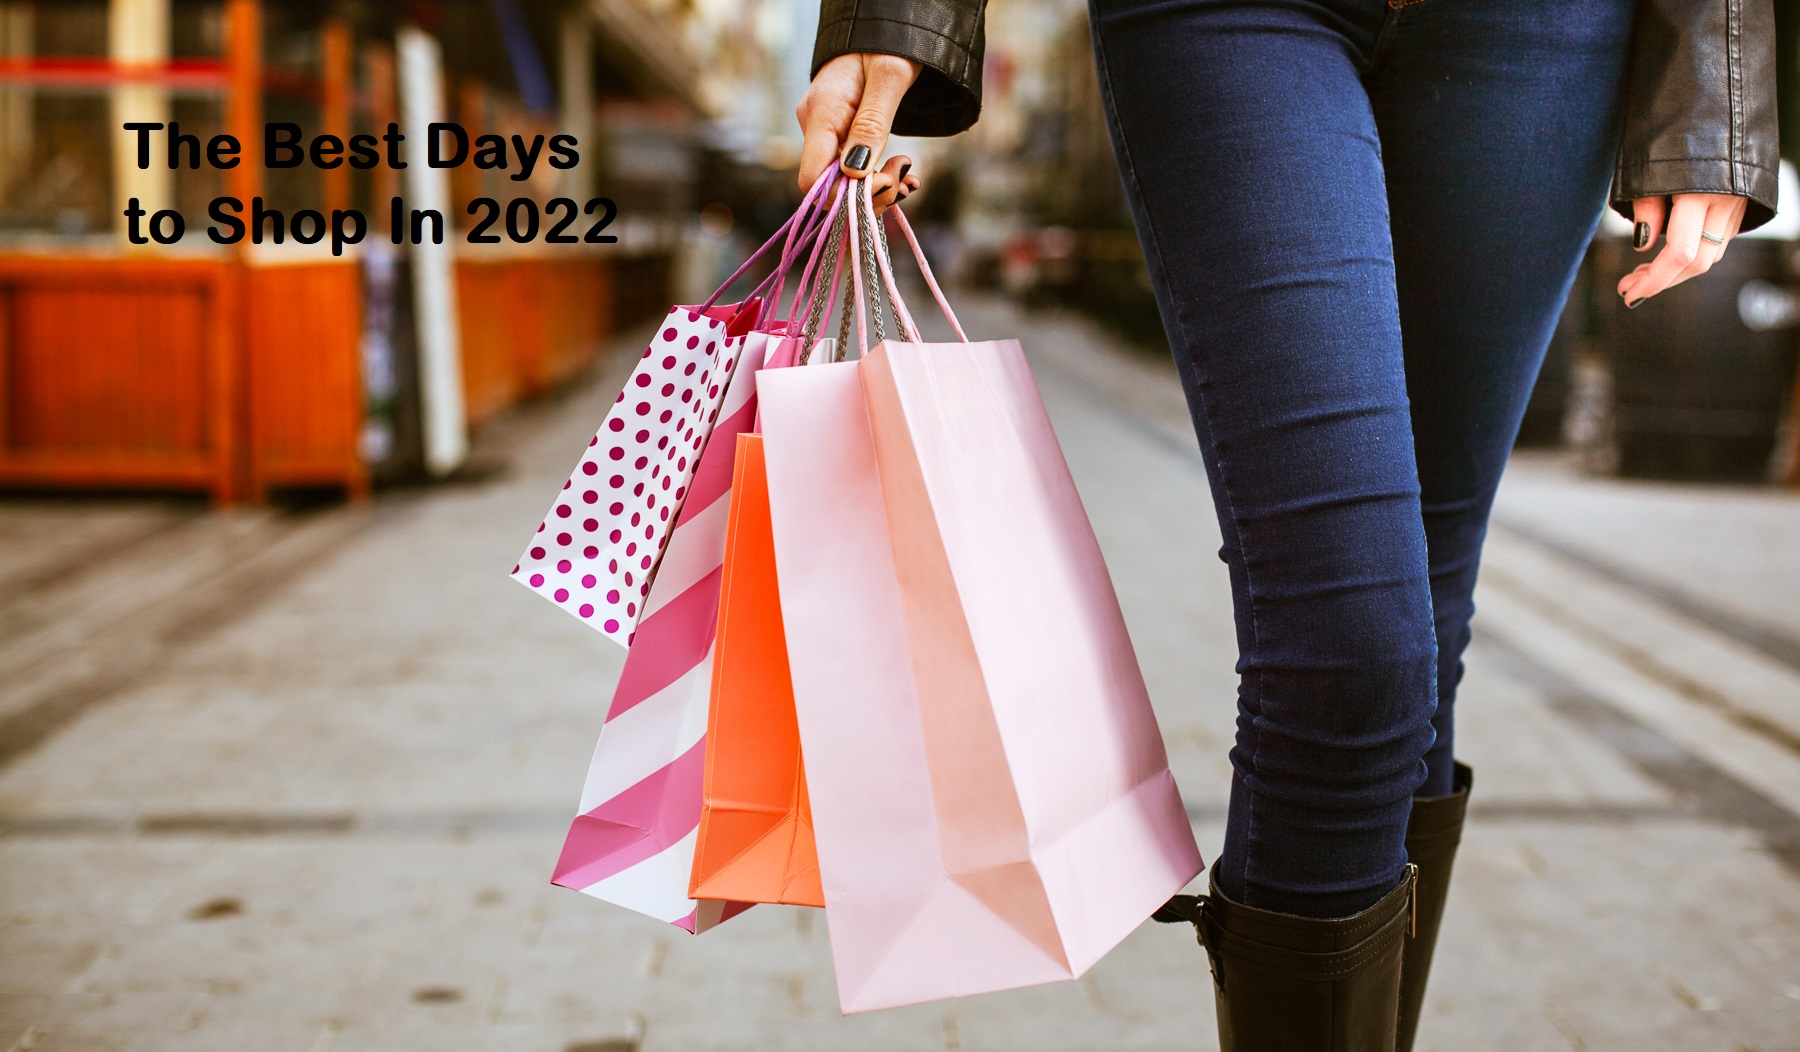 The Best Days to Shop In 2022